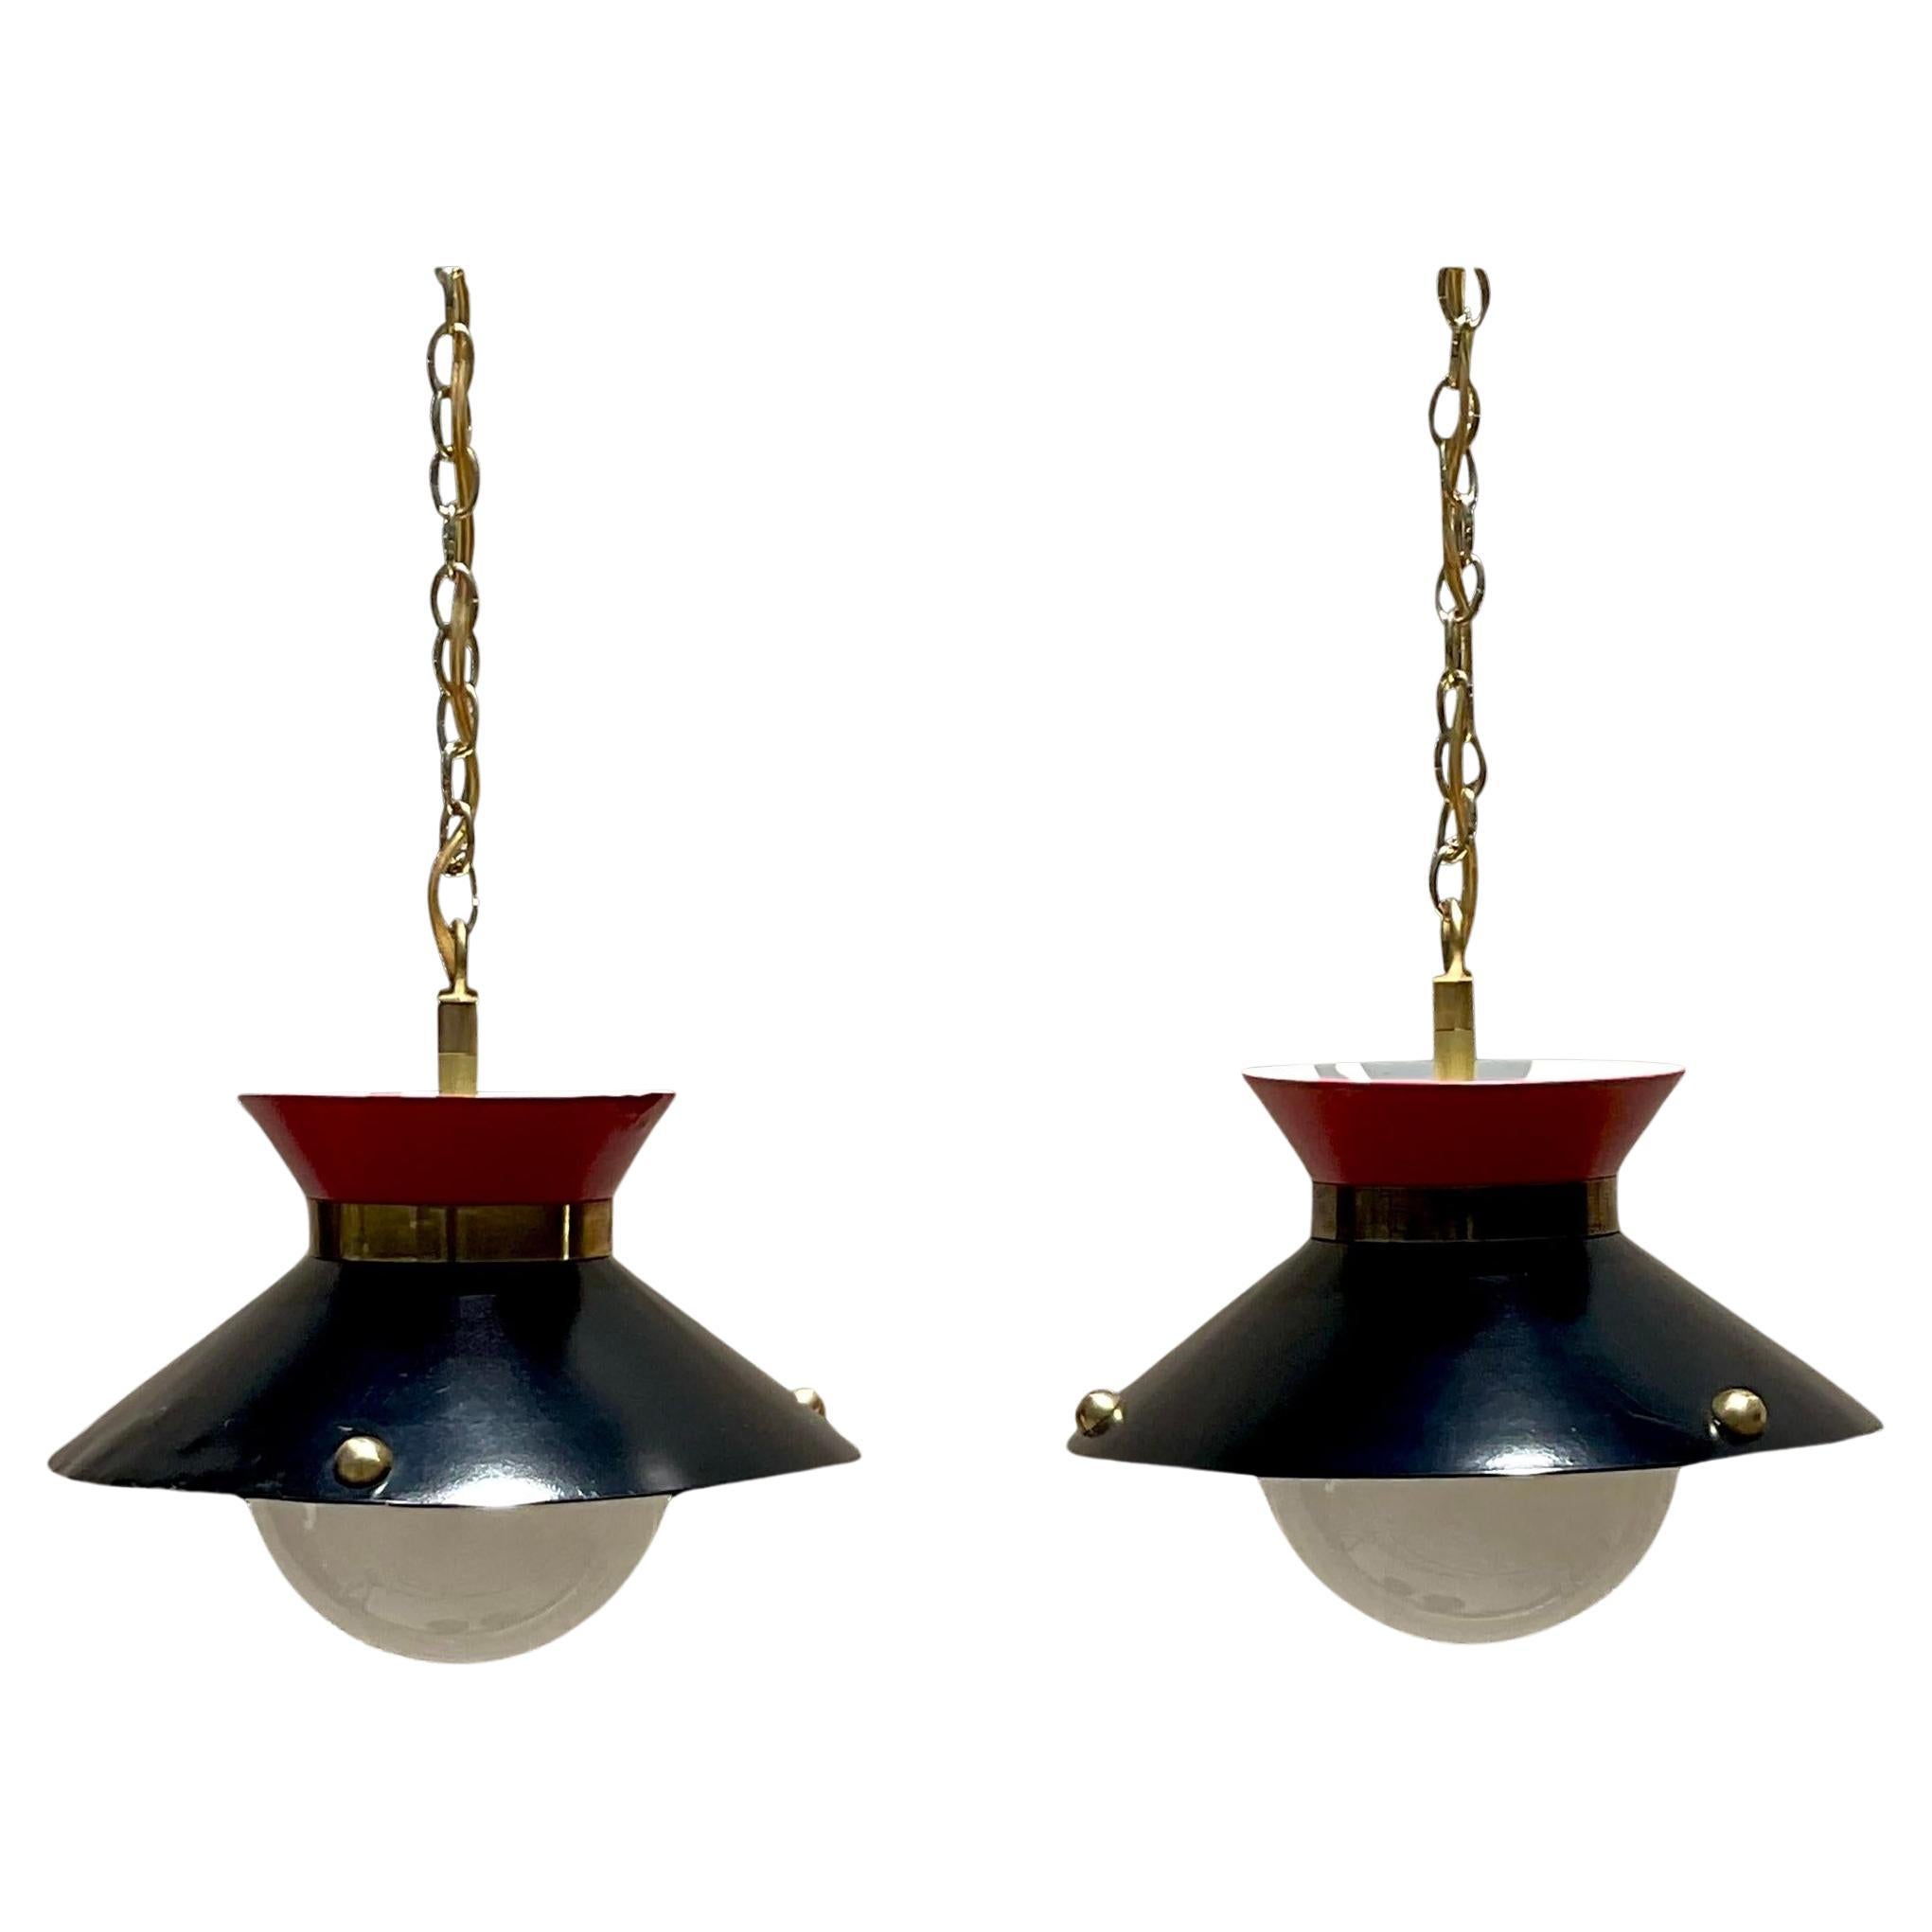 Vintage Mid 20th Century Brass Ring Pendant Lights - a Pair For Sale